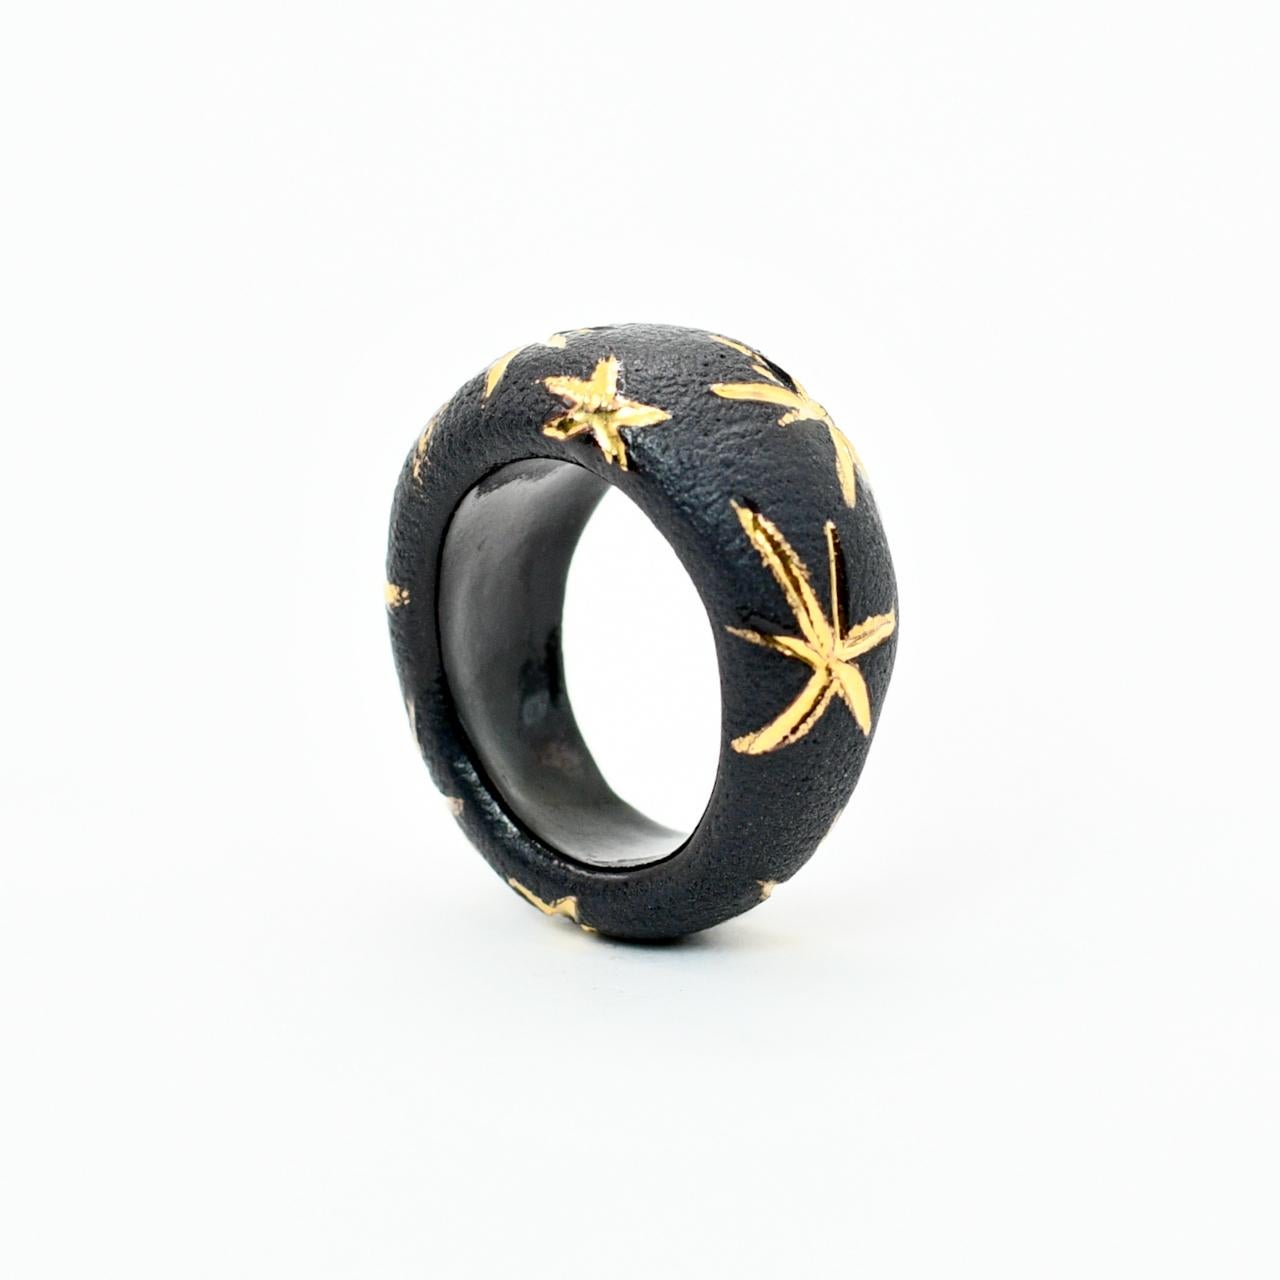 Porcelain  24K gold embellishment  Handmade in London

Experience opulence with the Tauri Black Porcelain Ring. Meticulously crafted from exquisite black onyx porcelain, its velvety matte surface beautifully juxtaposes with the graceful gleam of